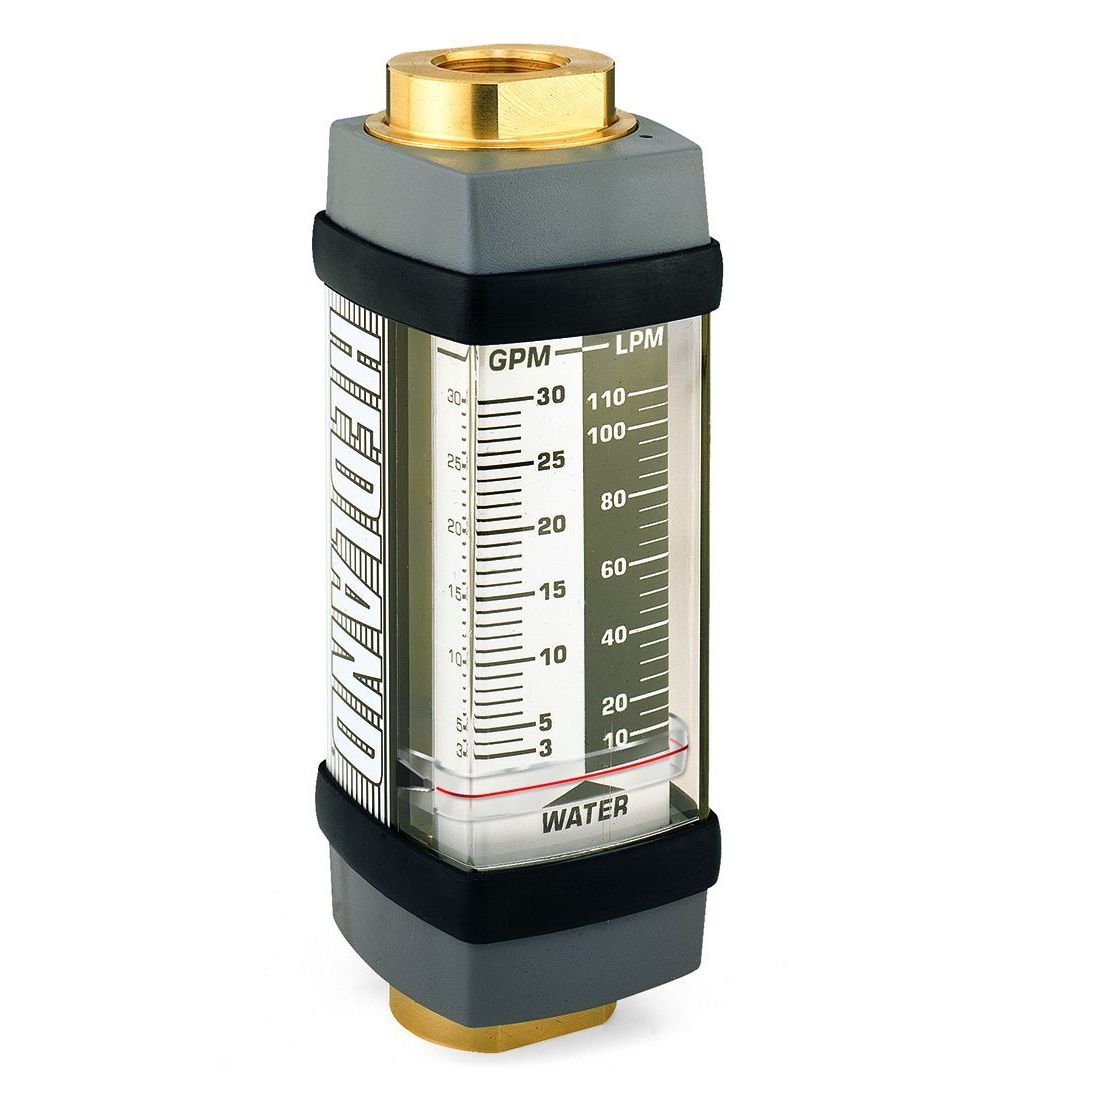 H704B-010 : Hedland 3500psi Brass Flow Meter for Water, #12 SAE (3/4), 0.1 to 1.0 GPM